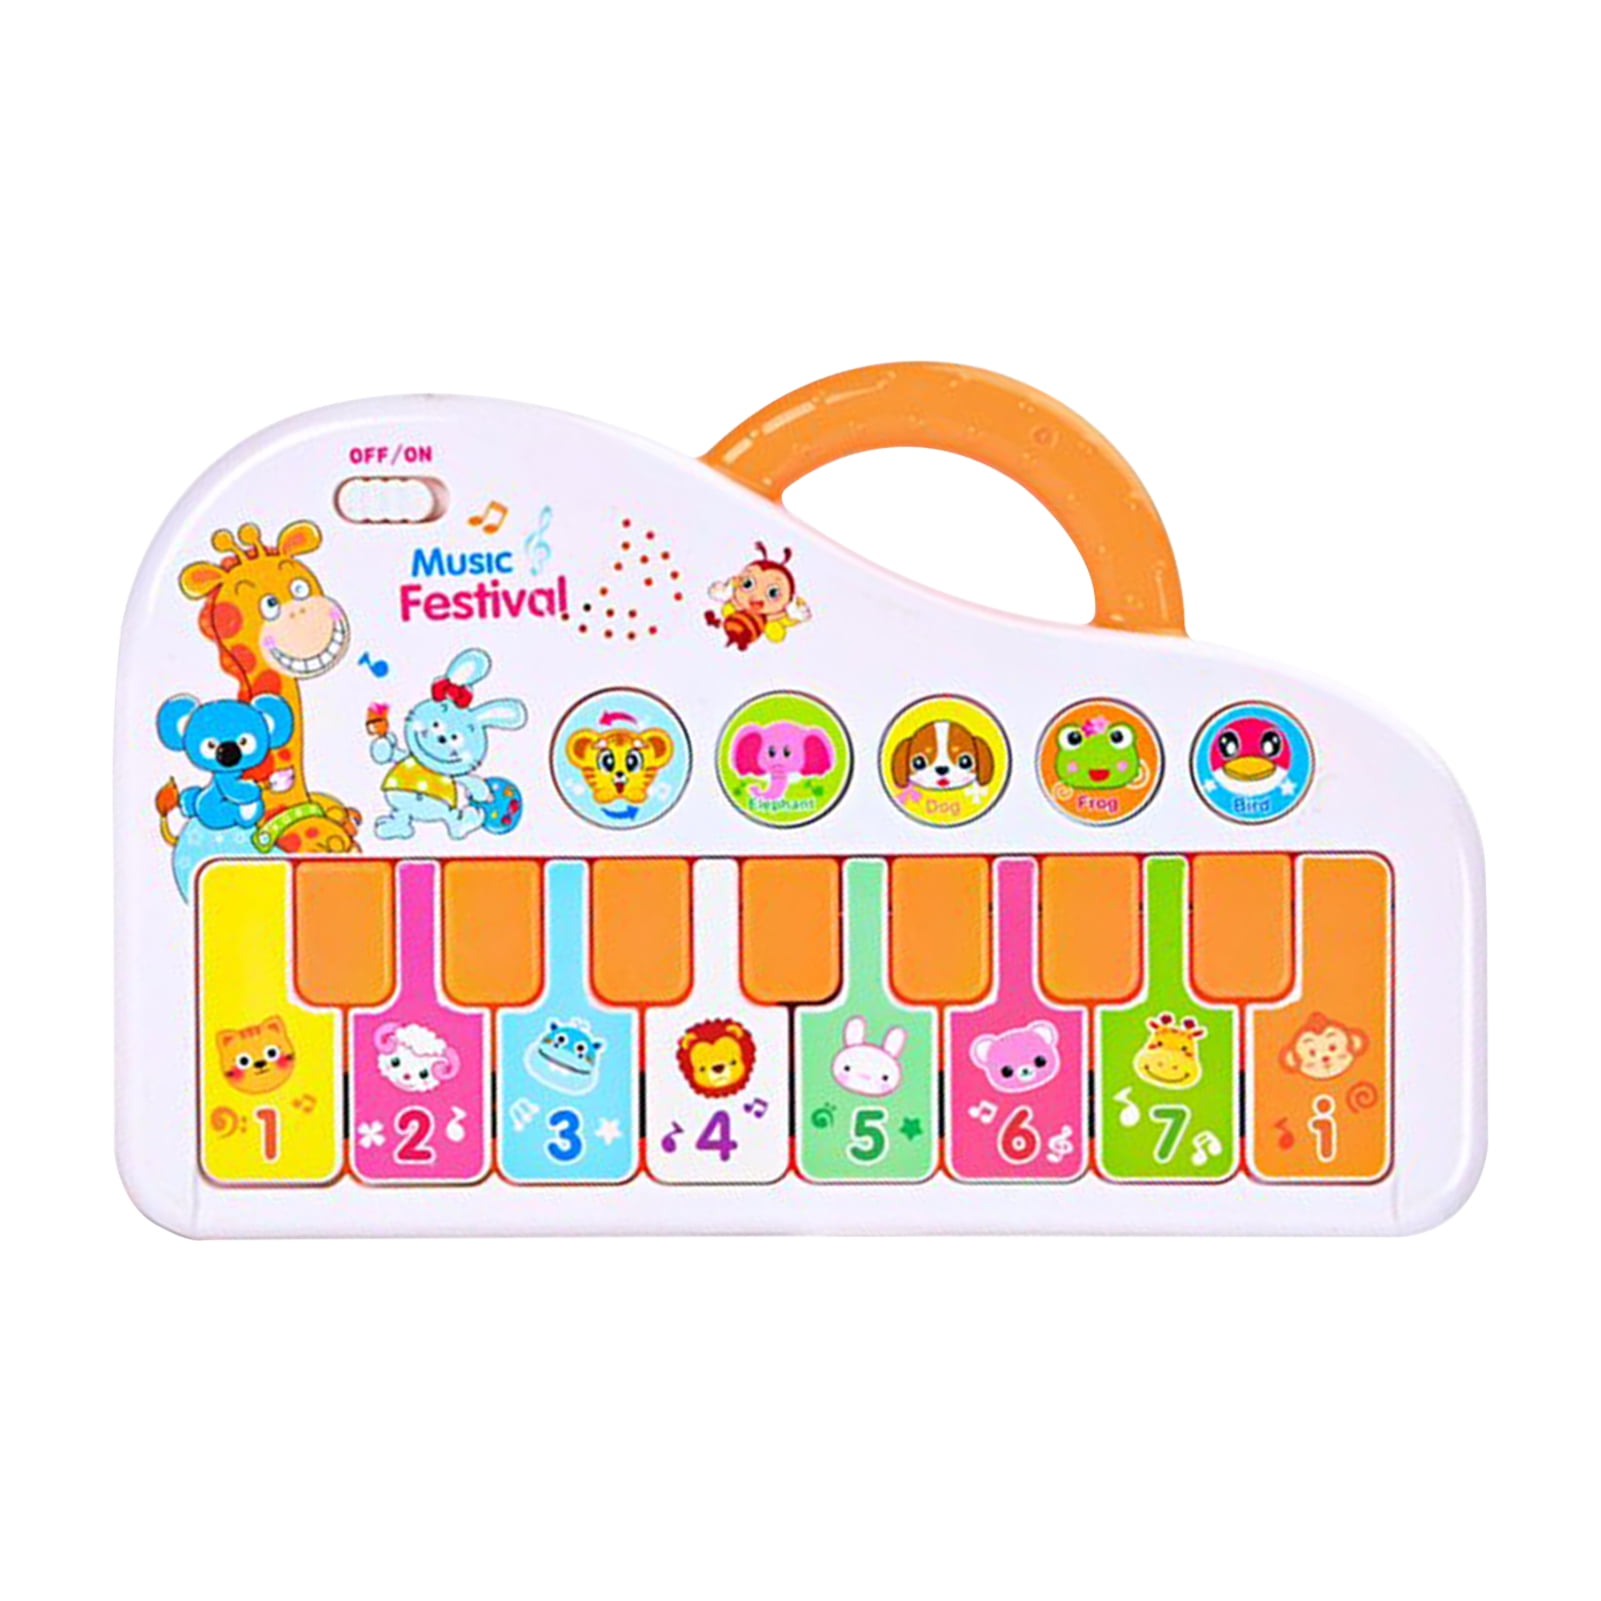 Details about   CUTE STONE 5 in 1 Musical Instruments Toys,Kids Electronic Piano Keyboard Xyloph 